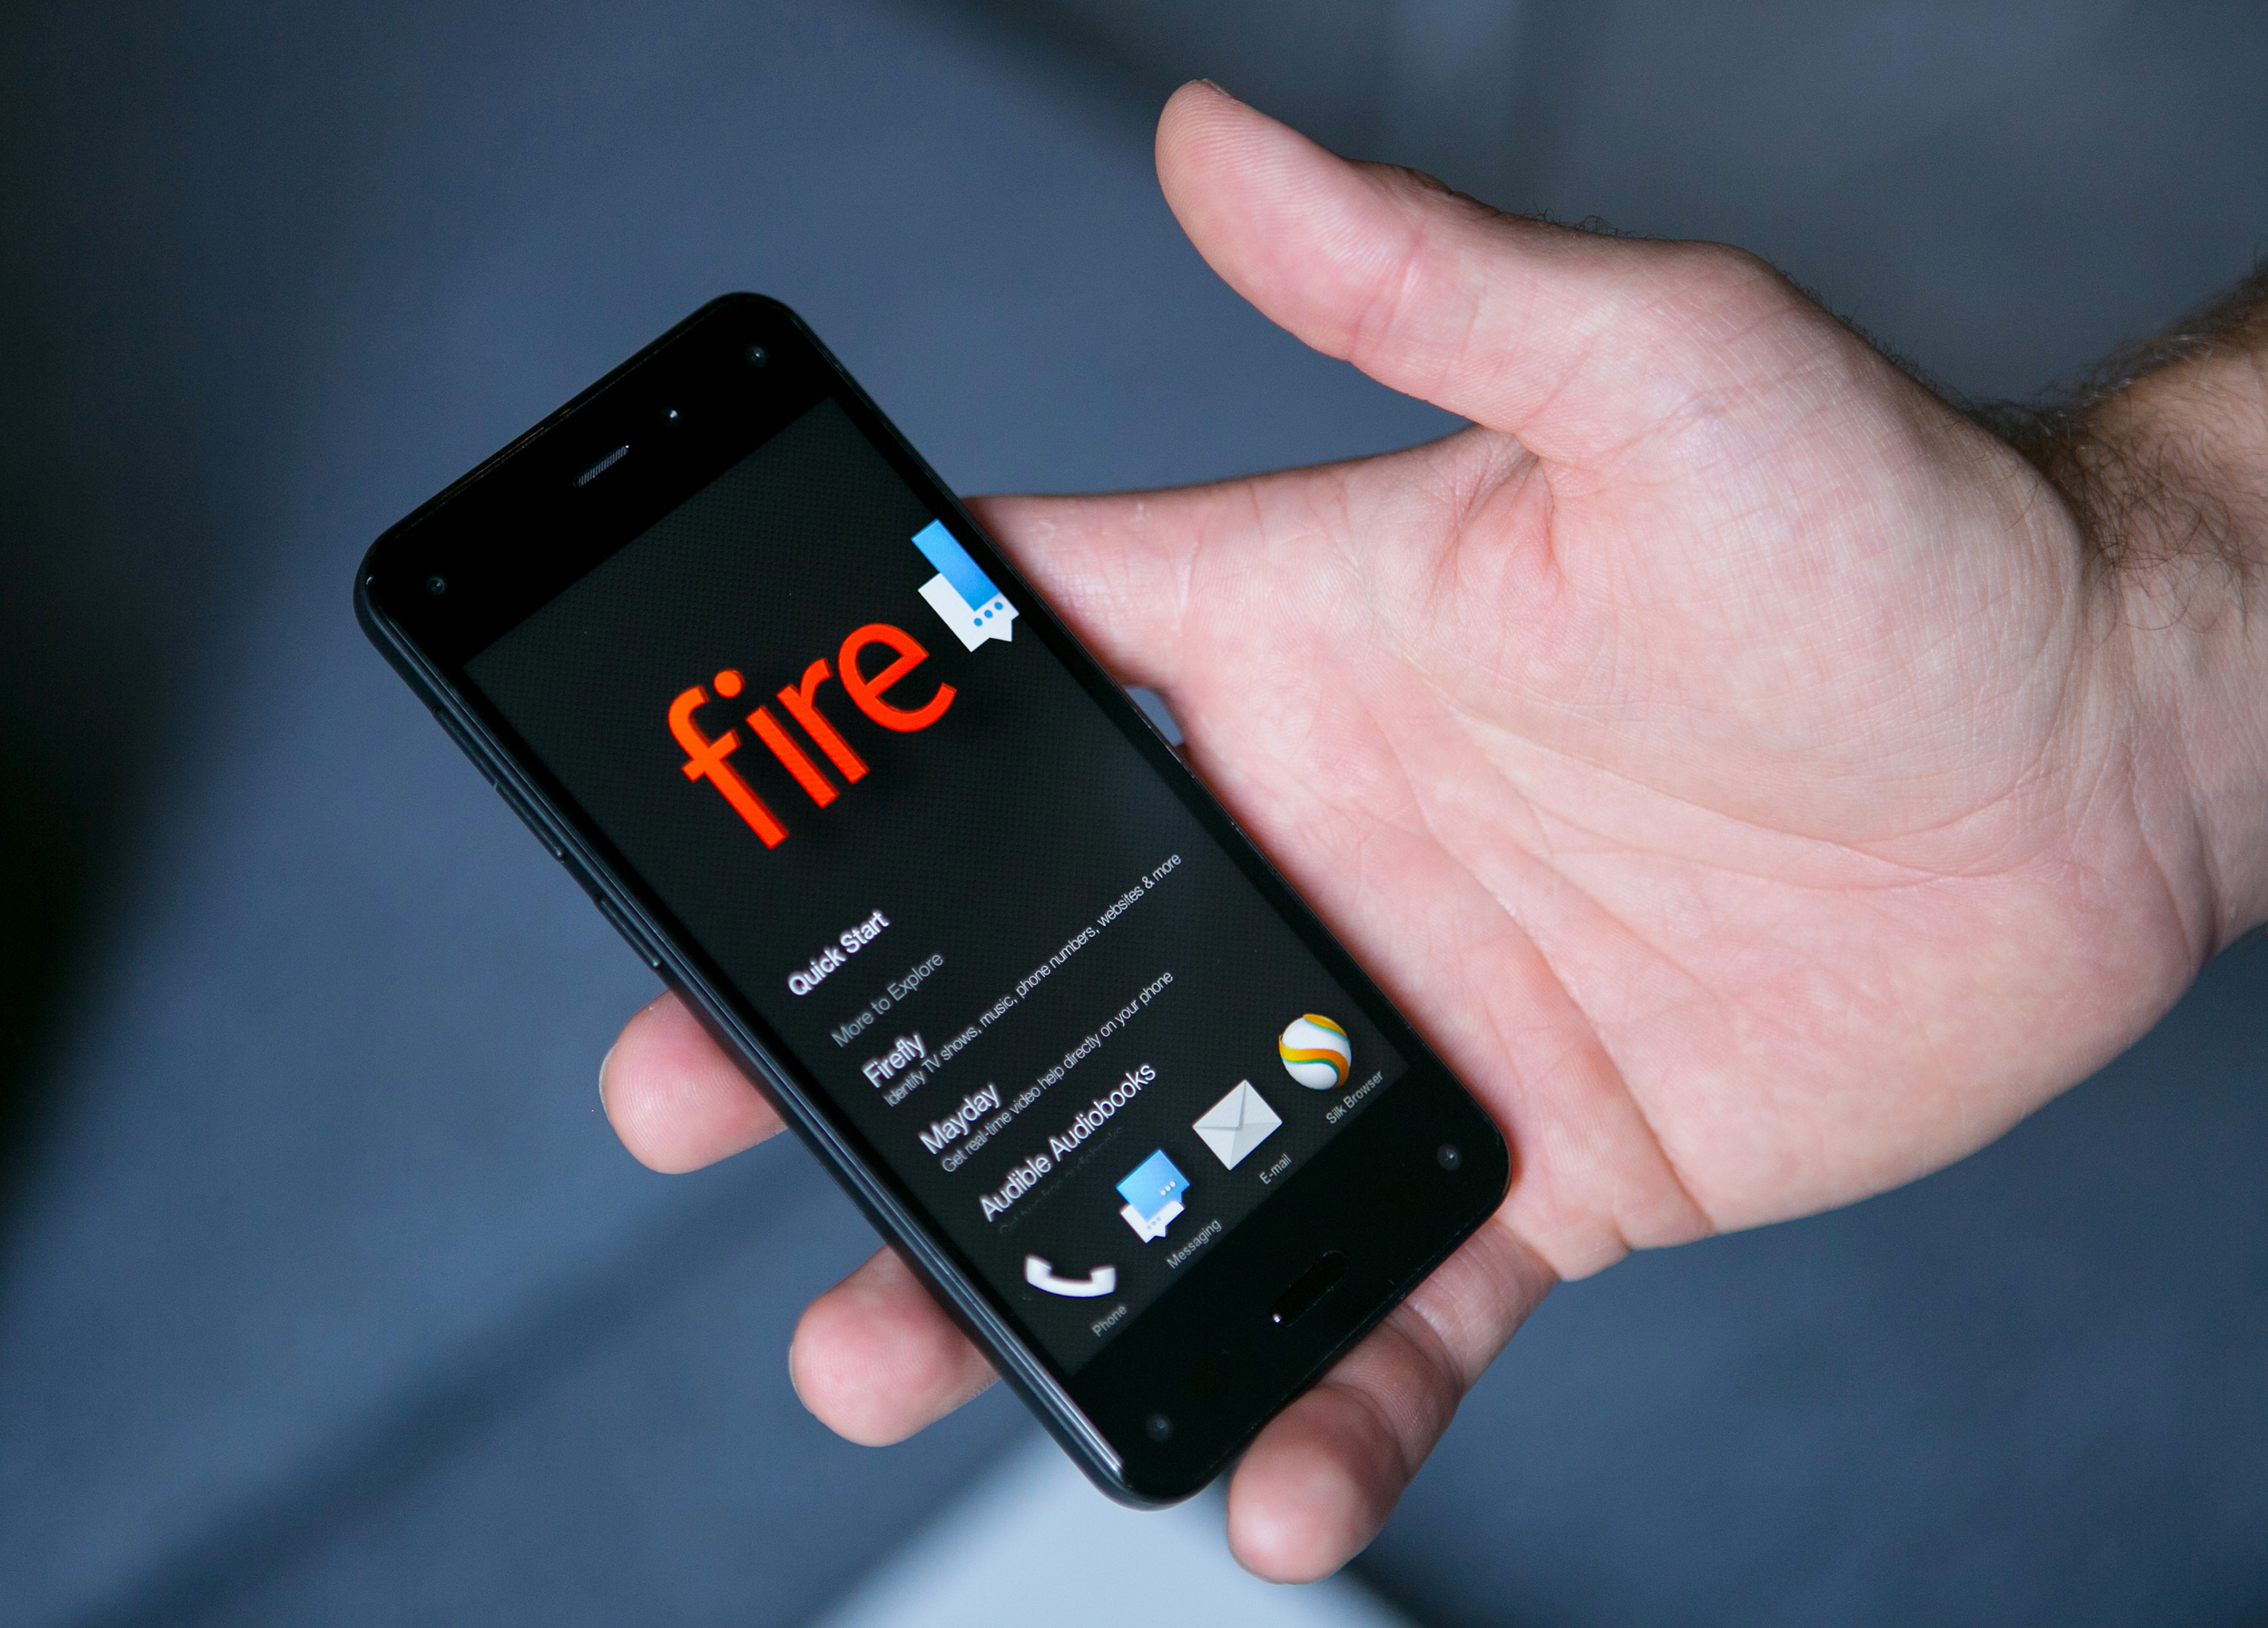 German Launch For Amazon's Fire Smartphone